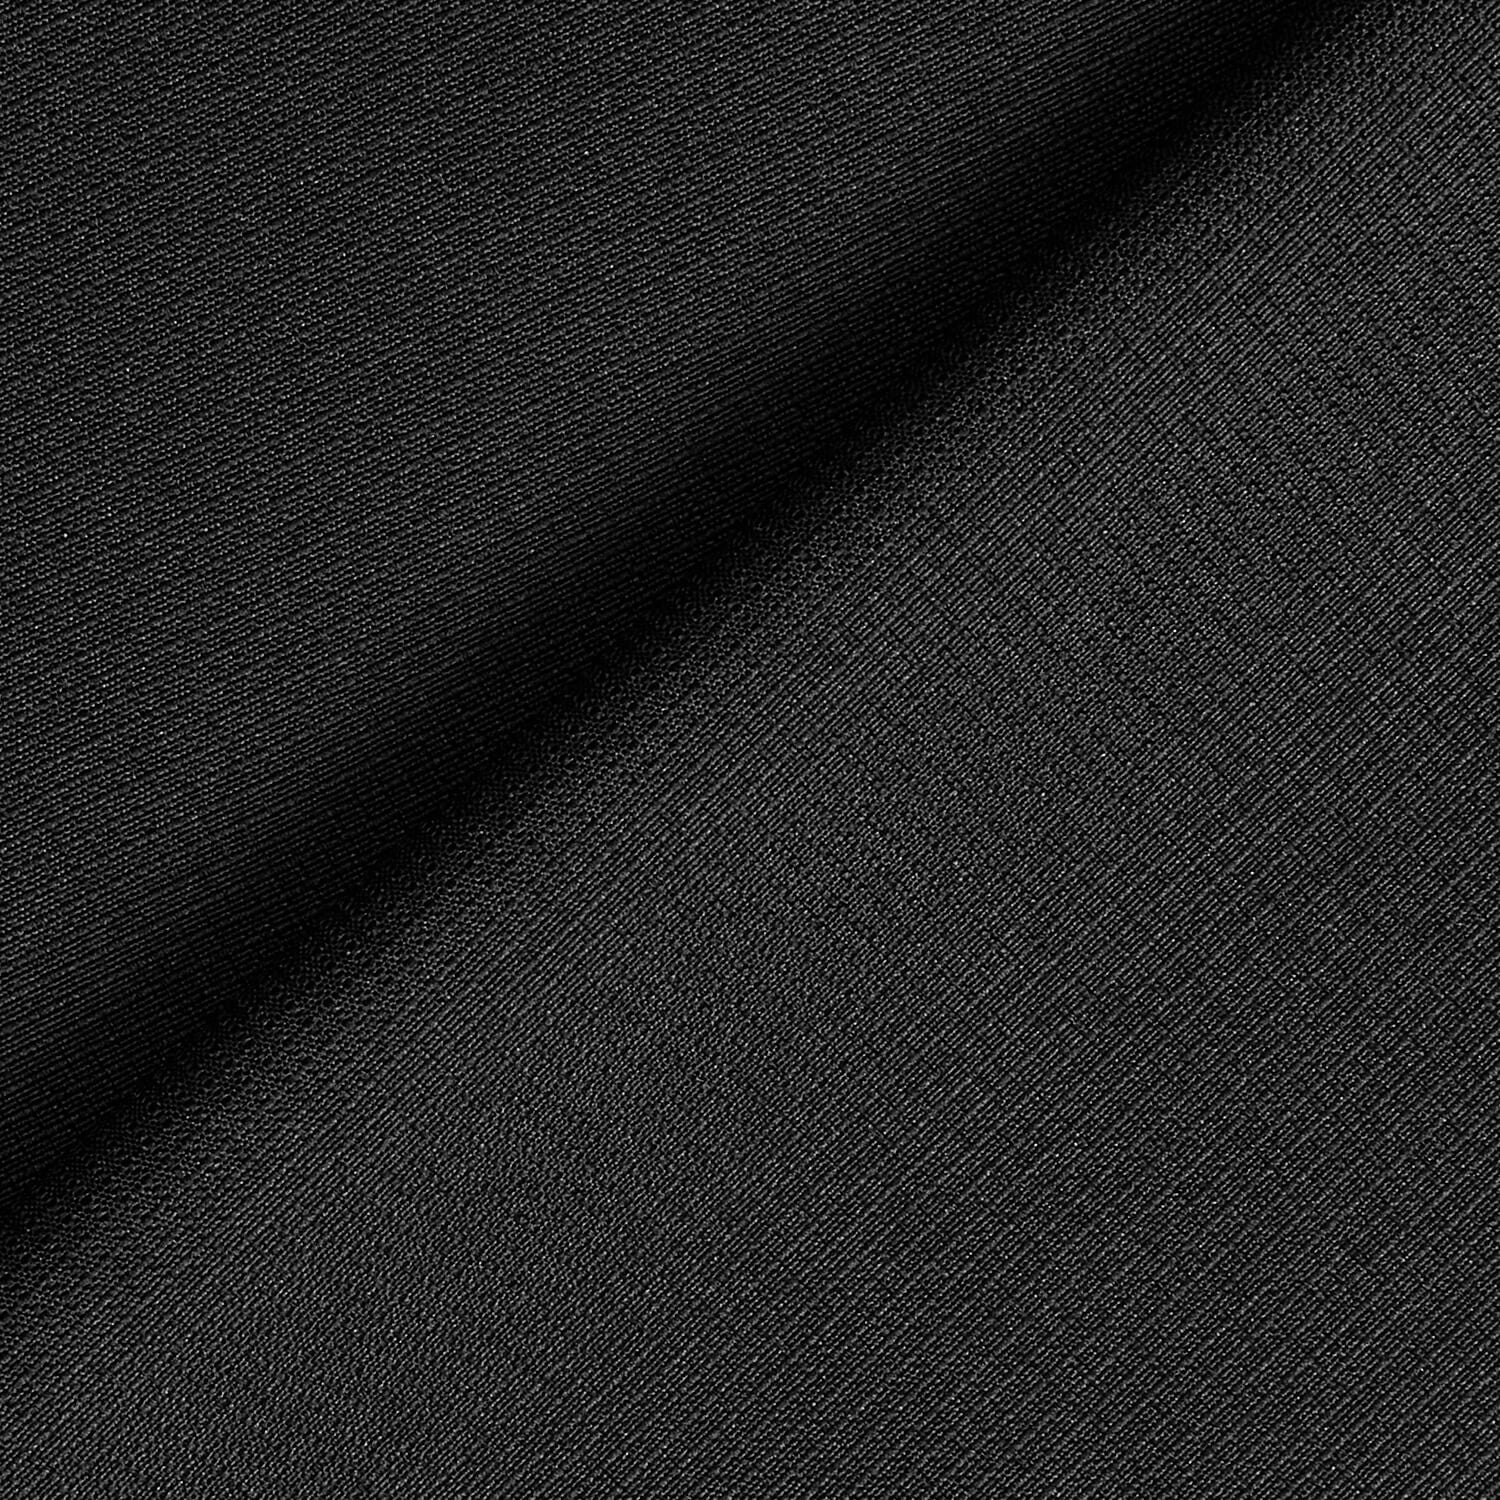 Woven Polyester Lining Fabric - 2.7 oz - Black - 58/60